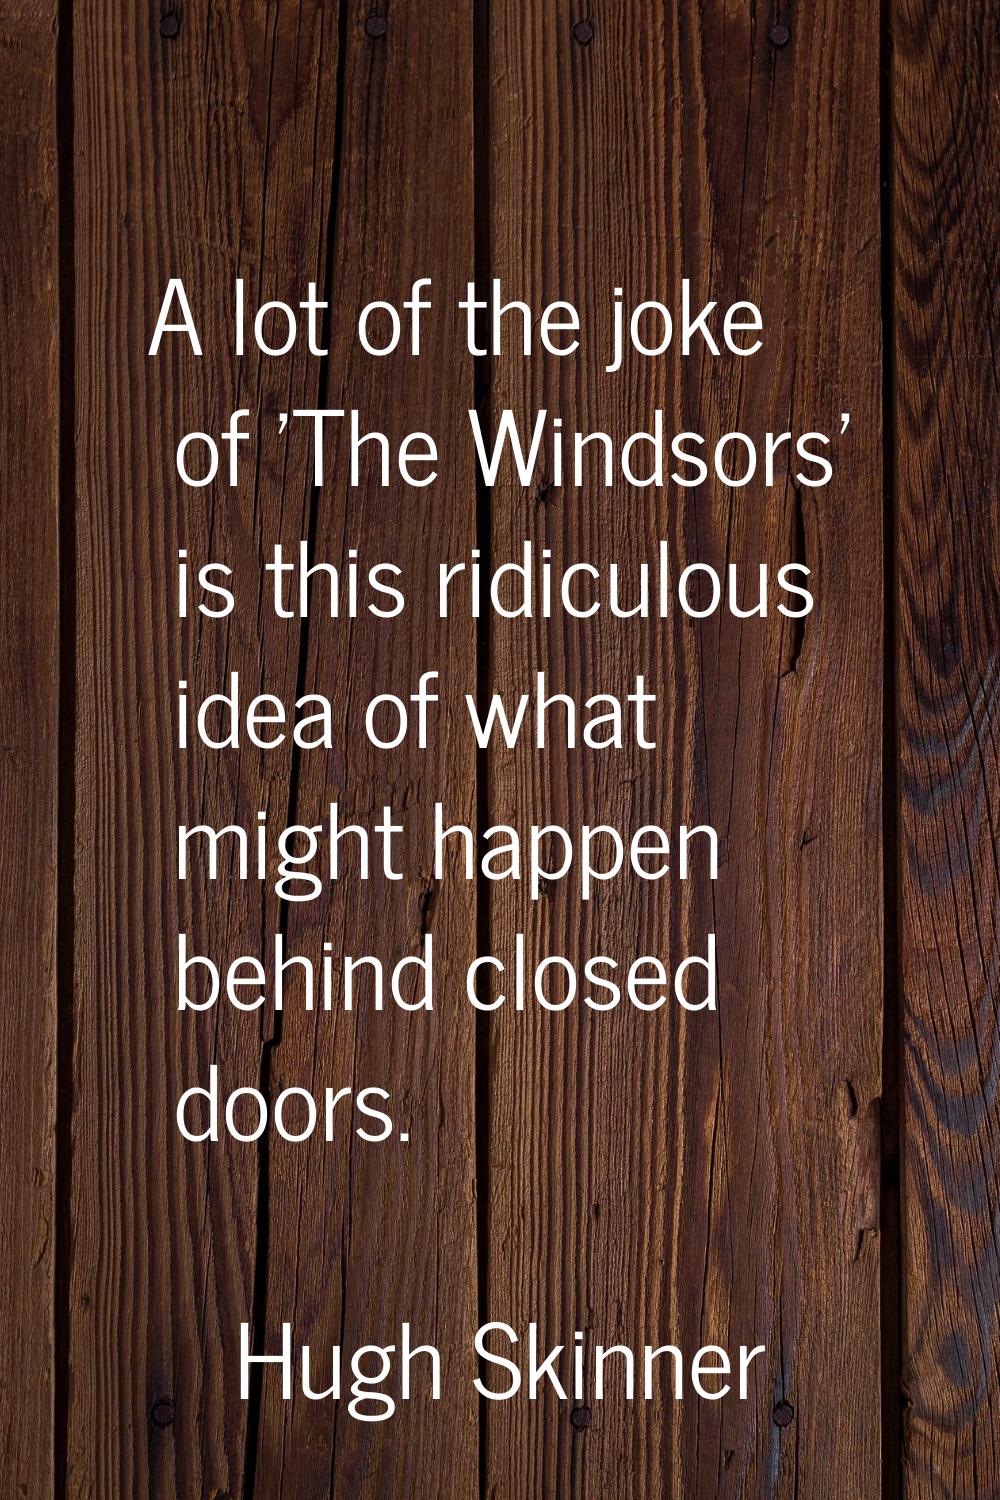 A lot of the joke of 'The Windsors' is this ridiculous idea of what might happen behind closed door